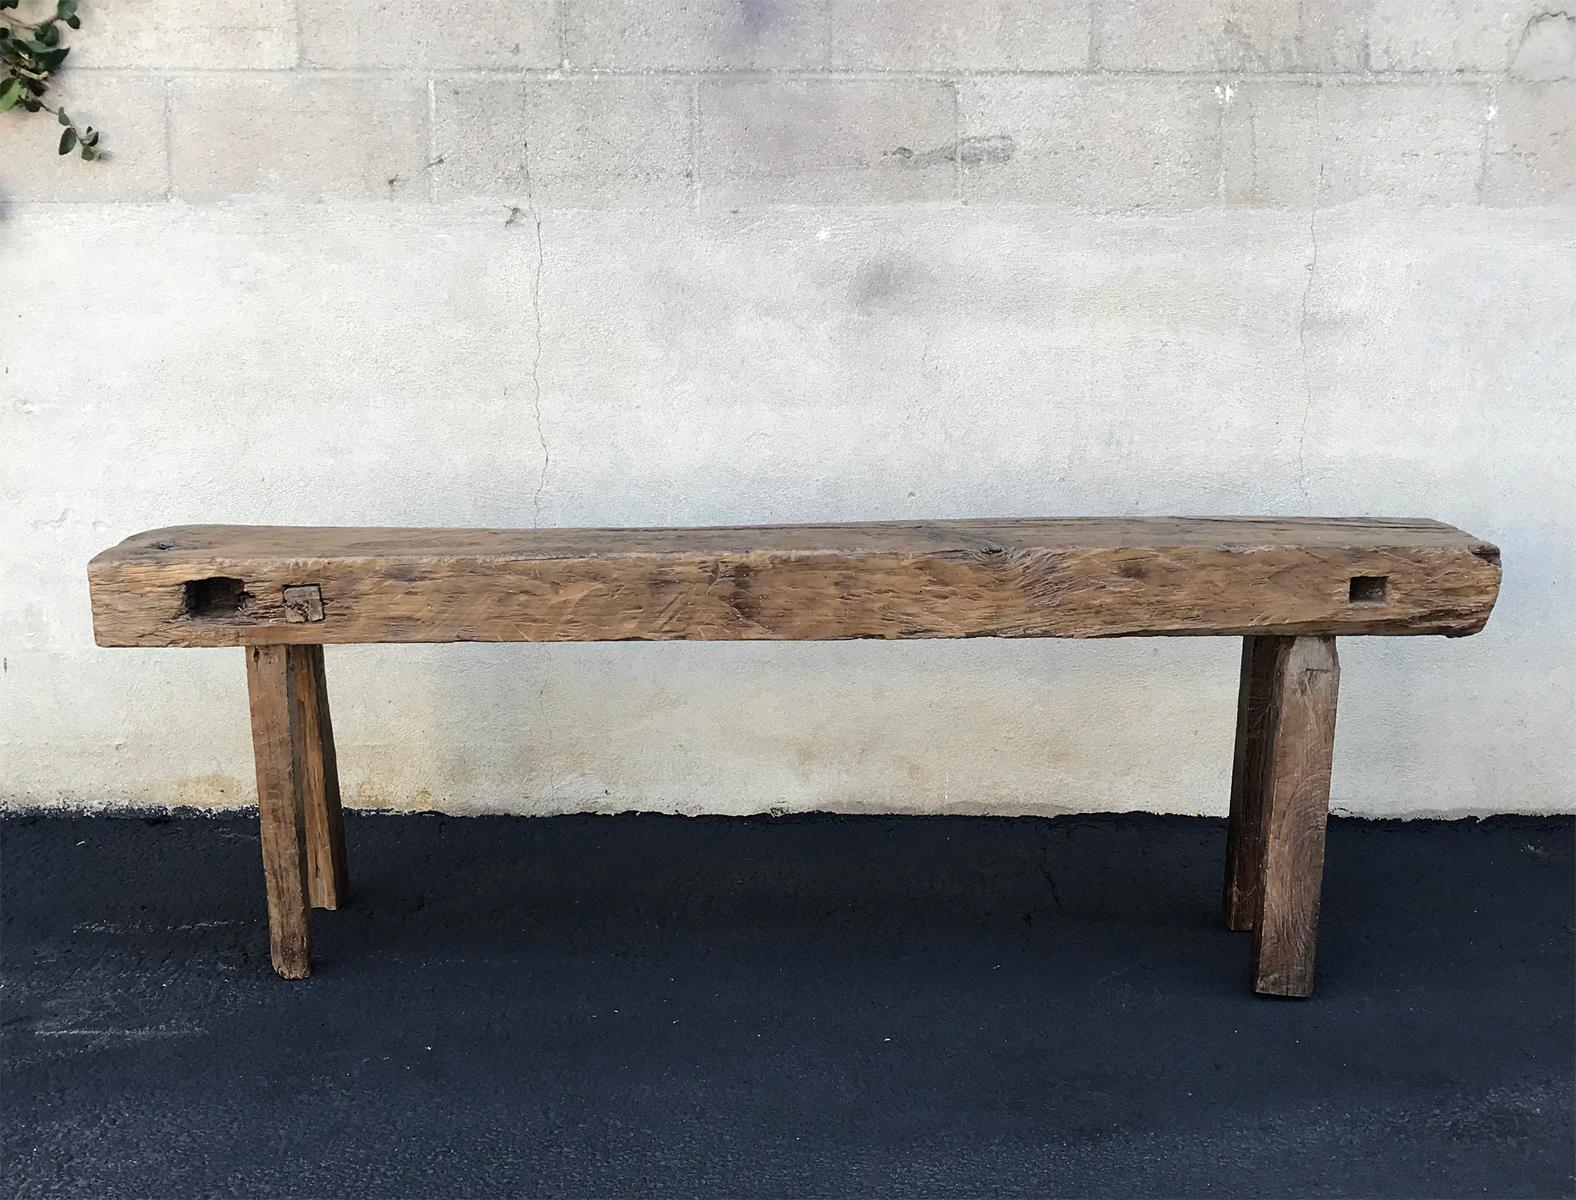 Low all original carpenter's bench from the highlands of Guatemala. Shows many years of use, as saw marks.
Legs on one side have been exposed to fire and are blackened, but non the less sturdy and clean, not smudgy.
This narrow console would be